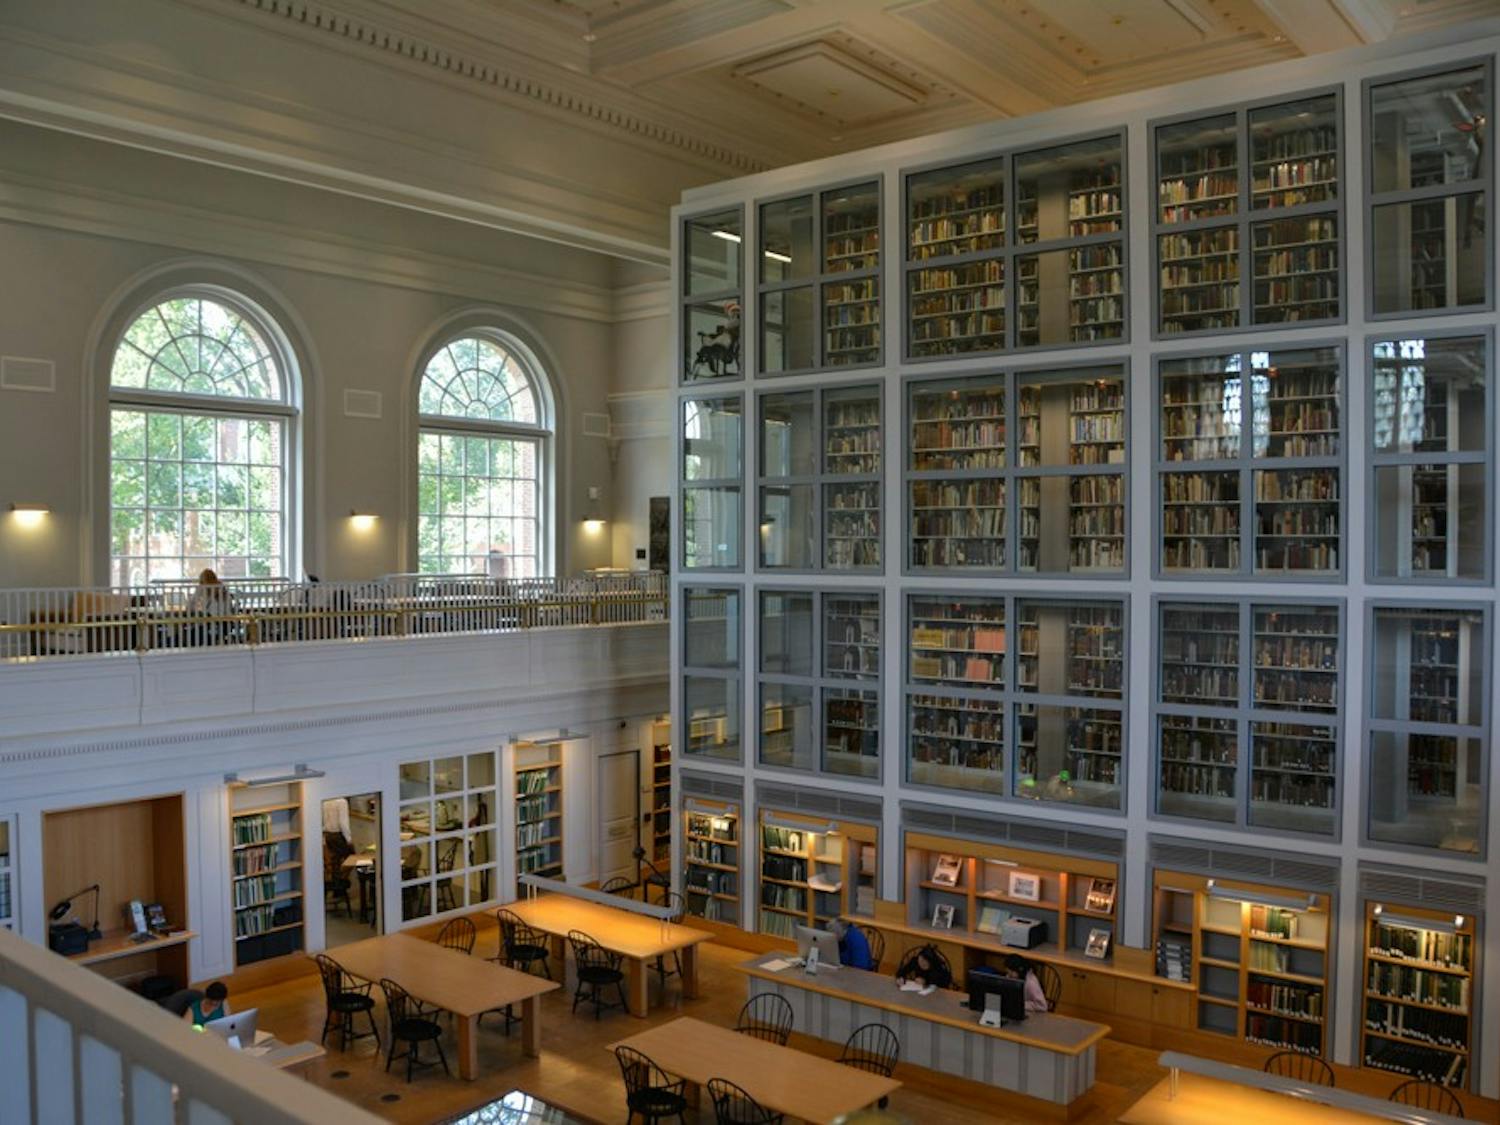 Rauner Library houses many of the treasures of Dartmouth College.